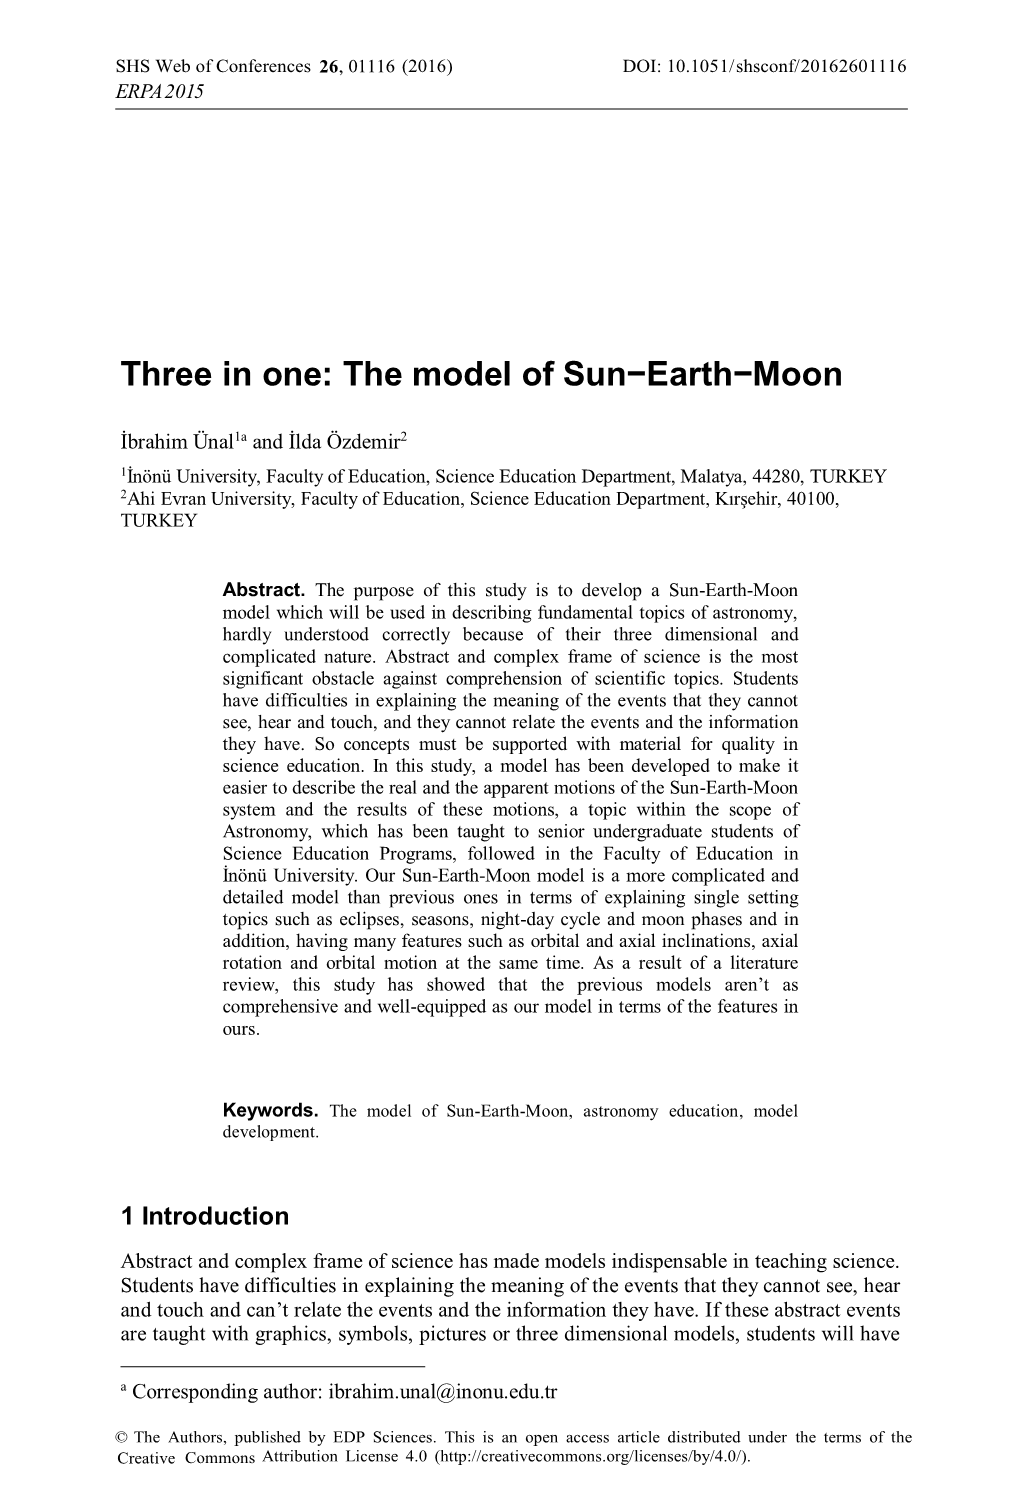 Three in One: the Model of Sun–Earth–Moon